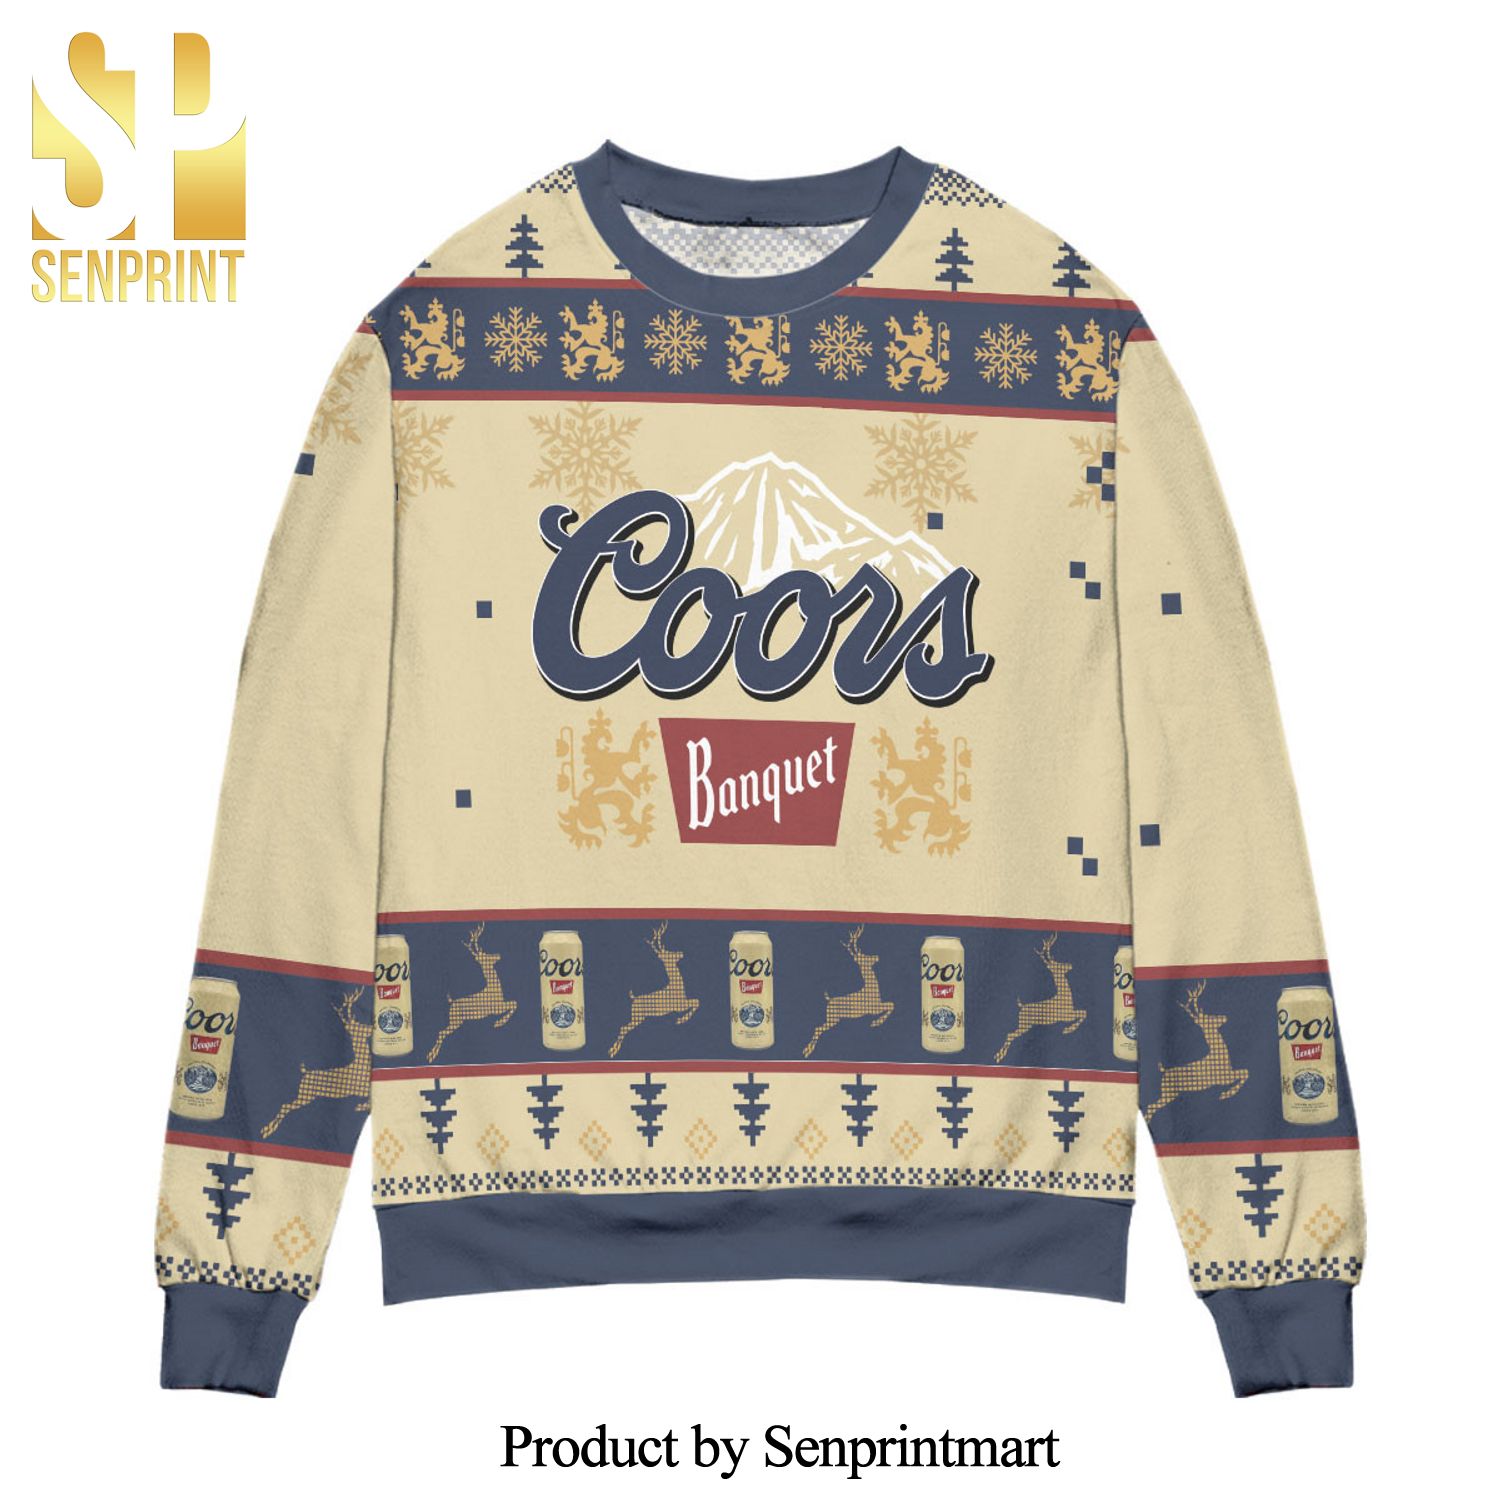 Coors Banquet Snowflake Christmas Pattern Knitted Ugly Christmas Sweater – Beige